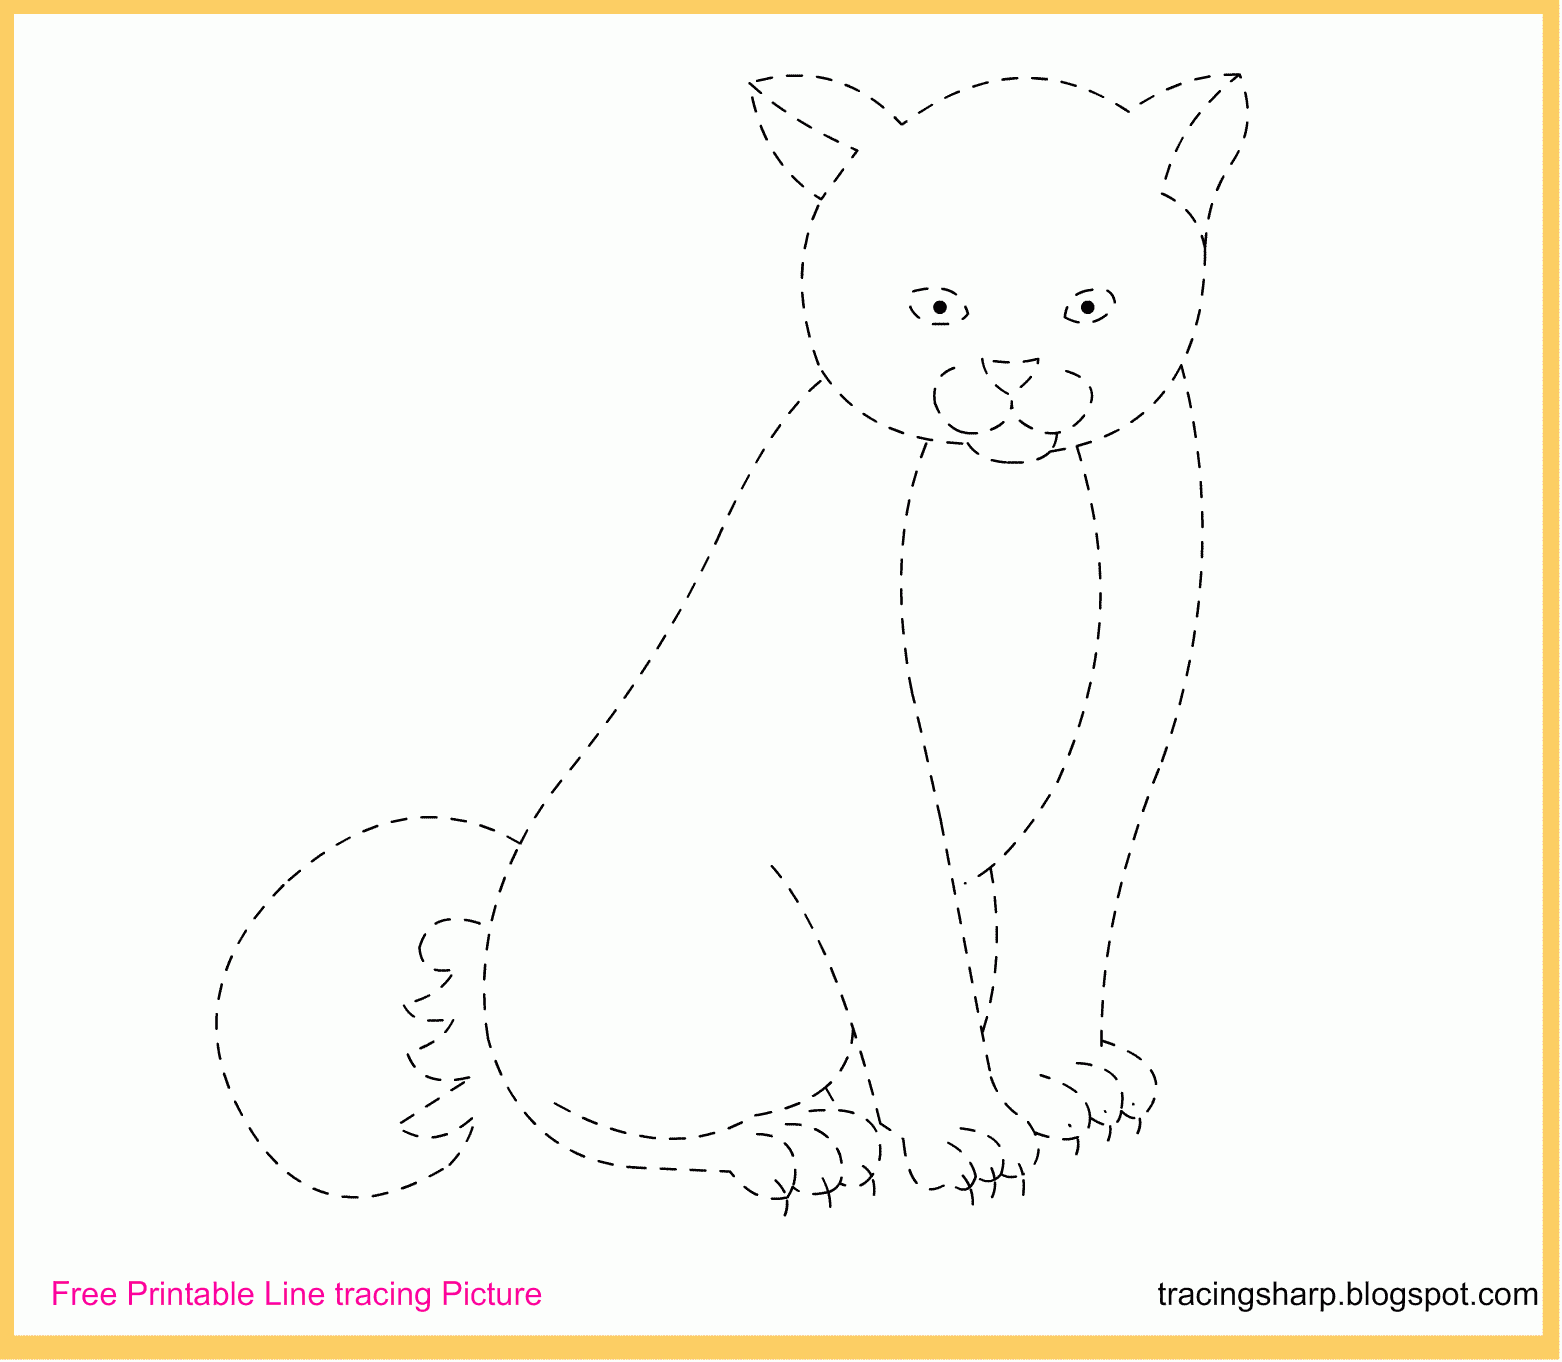 Free Tracing Line Printable: Cat Tracing Picture